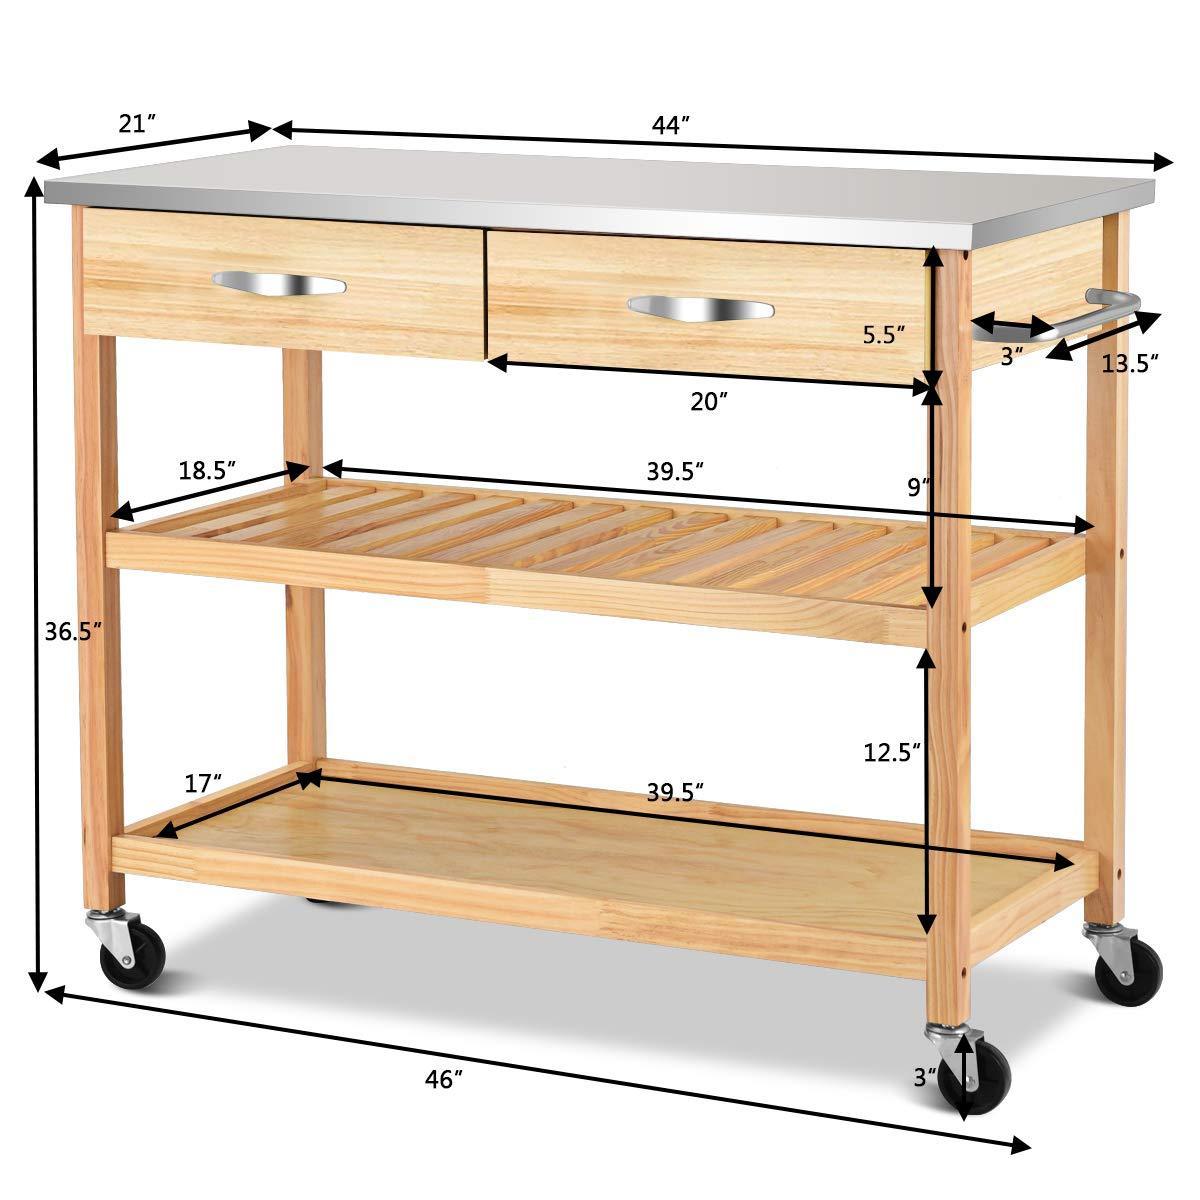 Purchase giantex kitchen trolley cart rolling island cart serving cart large storage with stainless steel countertop lockable wheels 2 drawers and shelf utility cart for home and restaurant solid pine wood